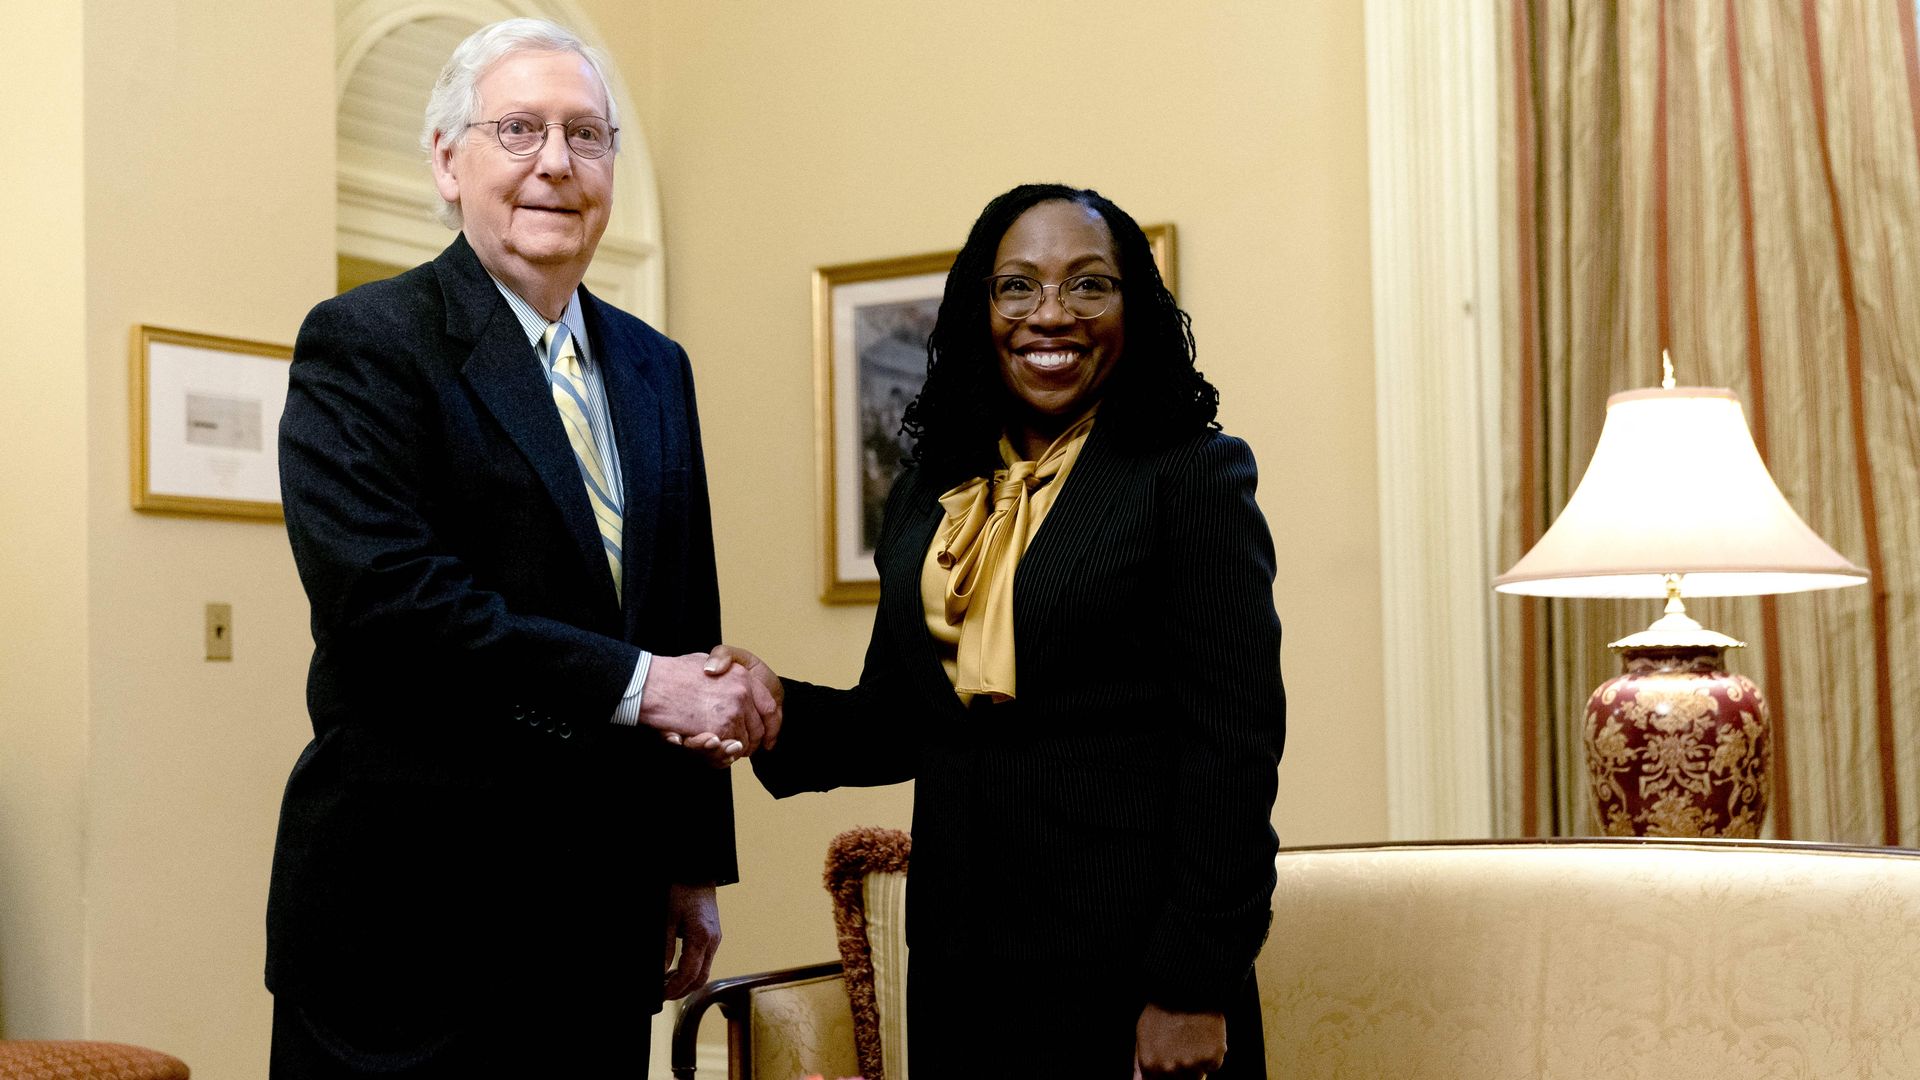 Senate Minority Leader Mitch McConnell is seen shaking hands with Judge Ketanji Brown Jackson.